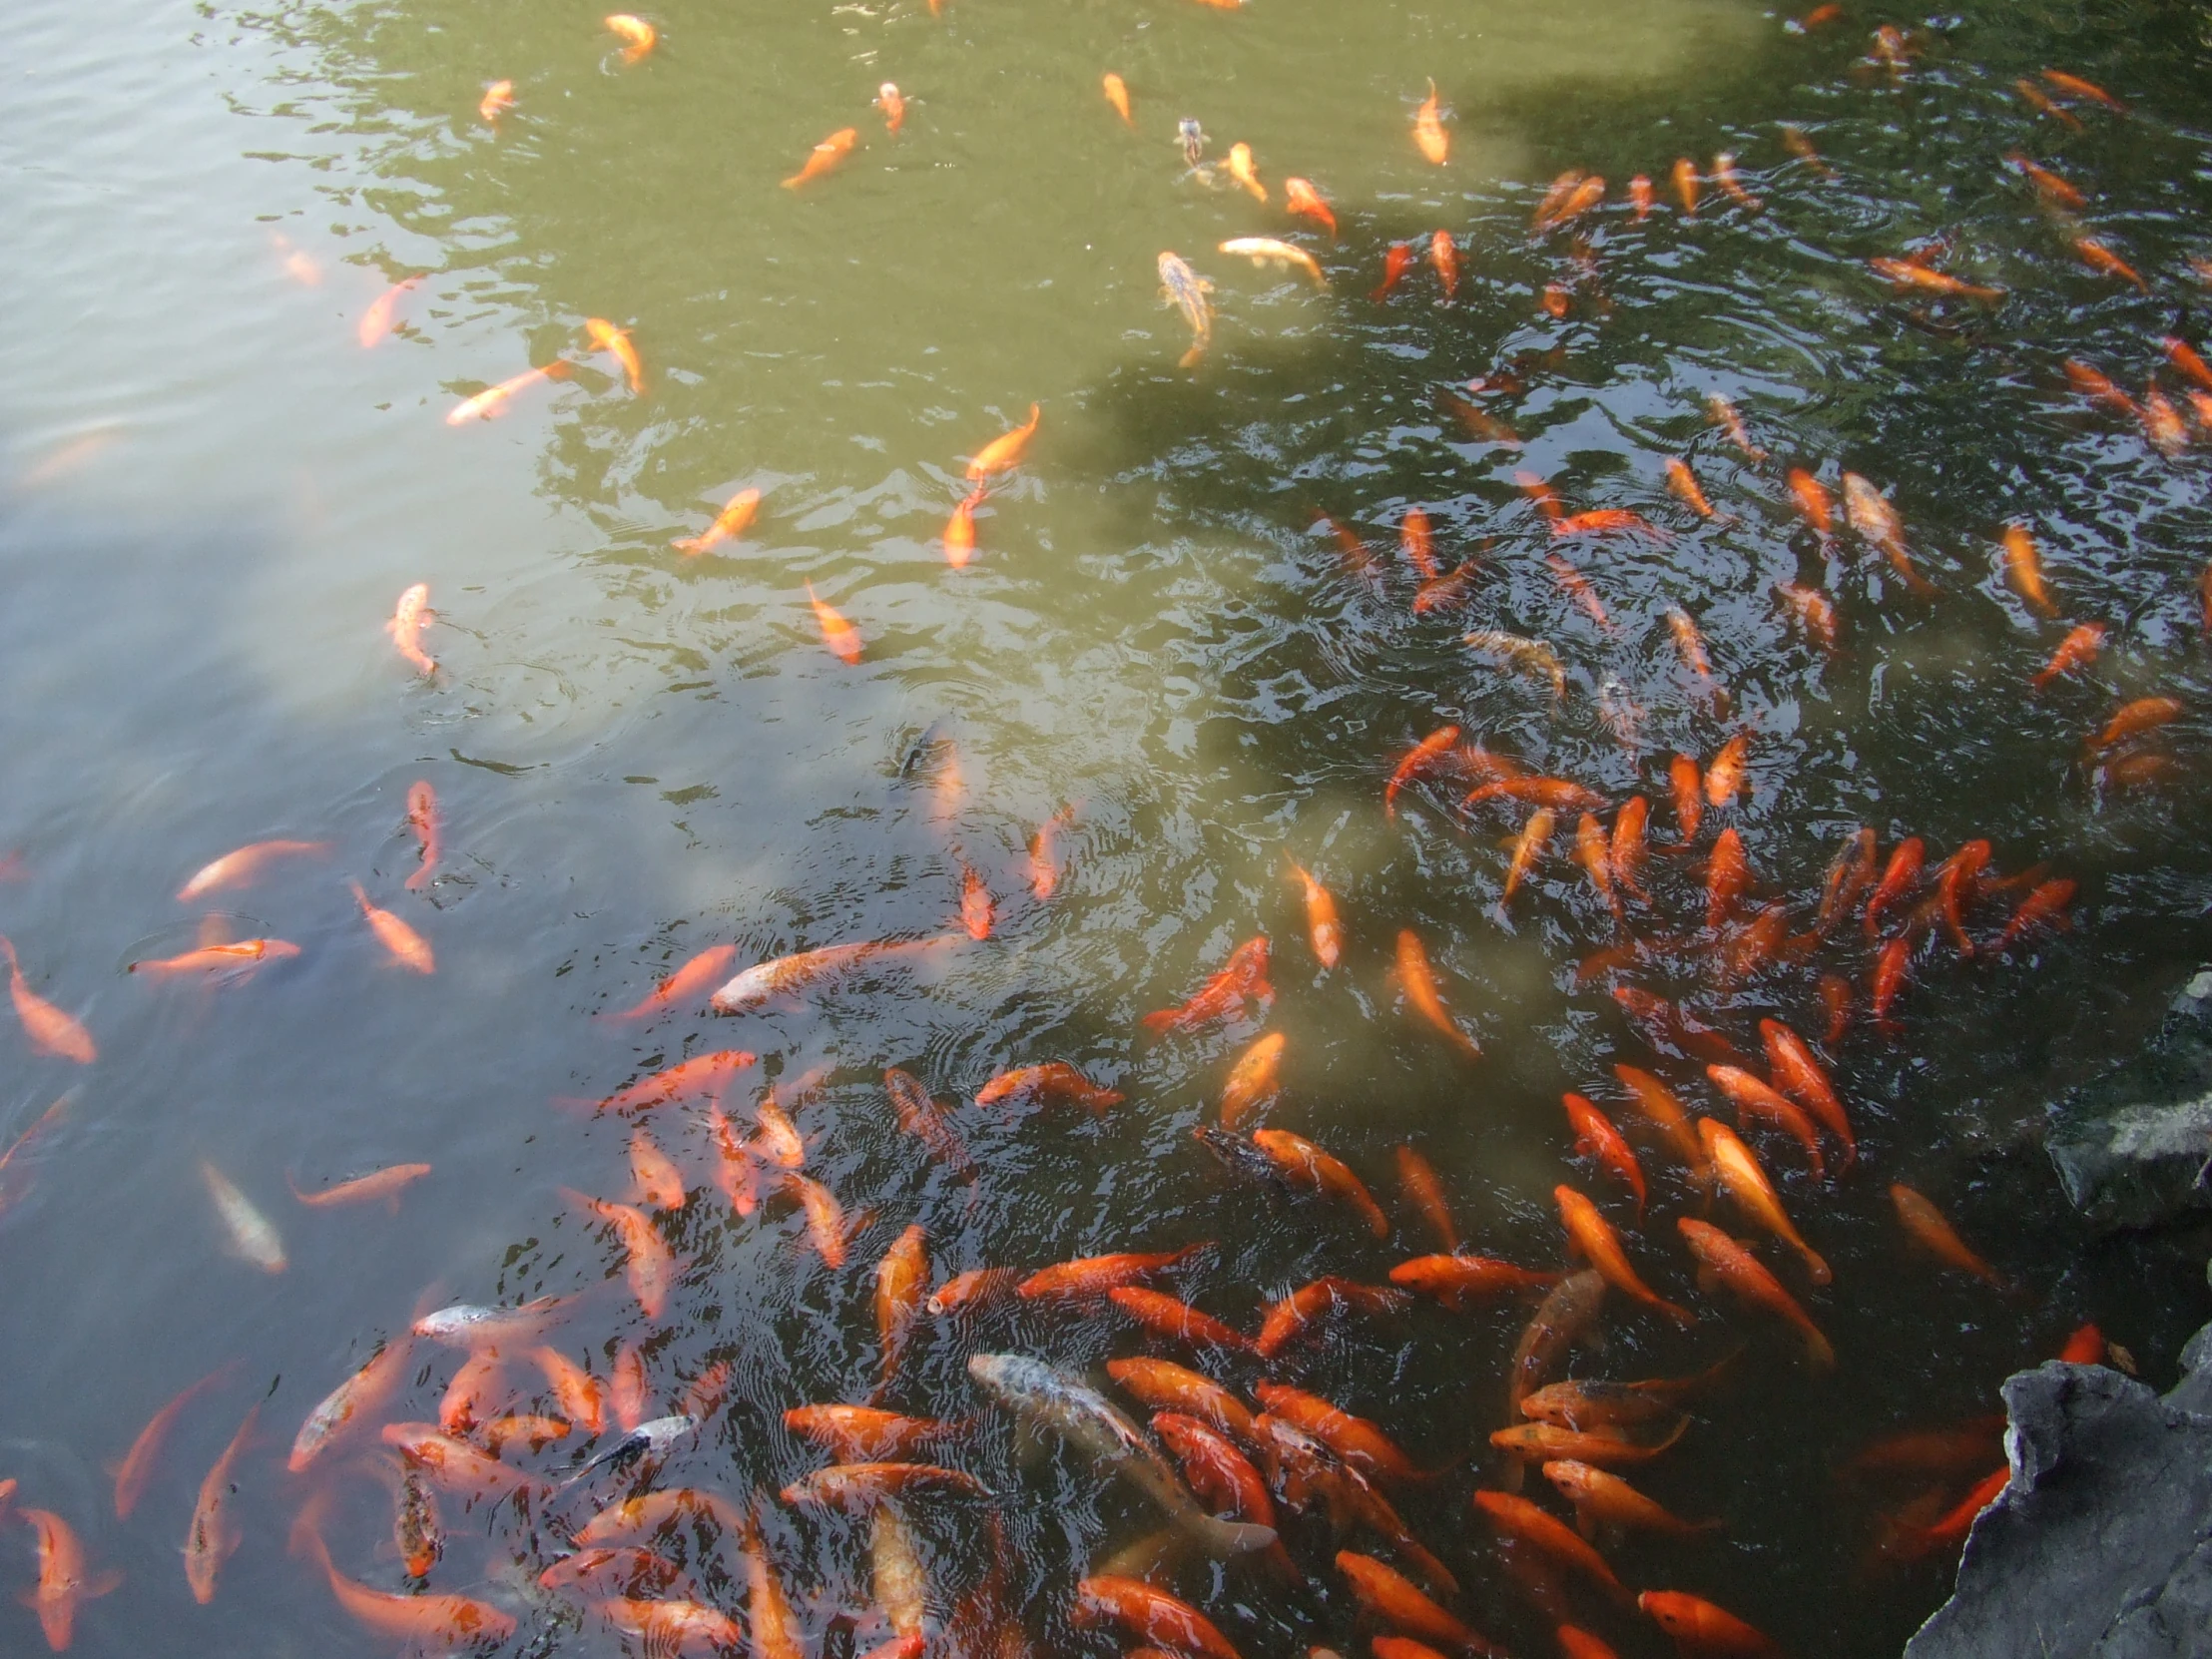 the many small fish are in the pond